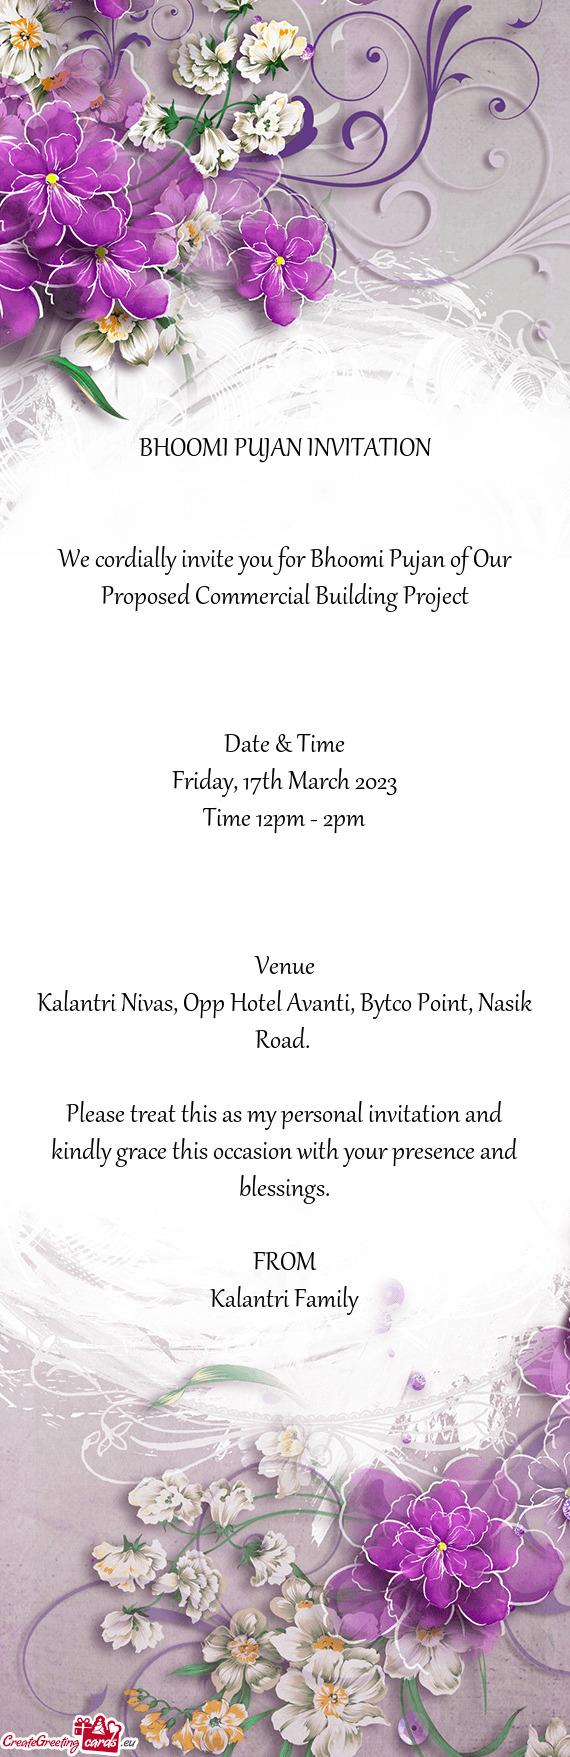 We cordially invite you for Bhoomi Pujan of Our Proposed Commercial Building Project